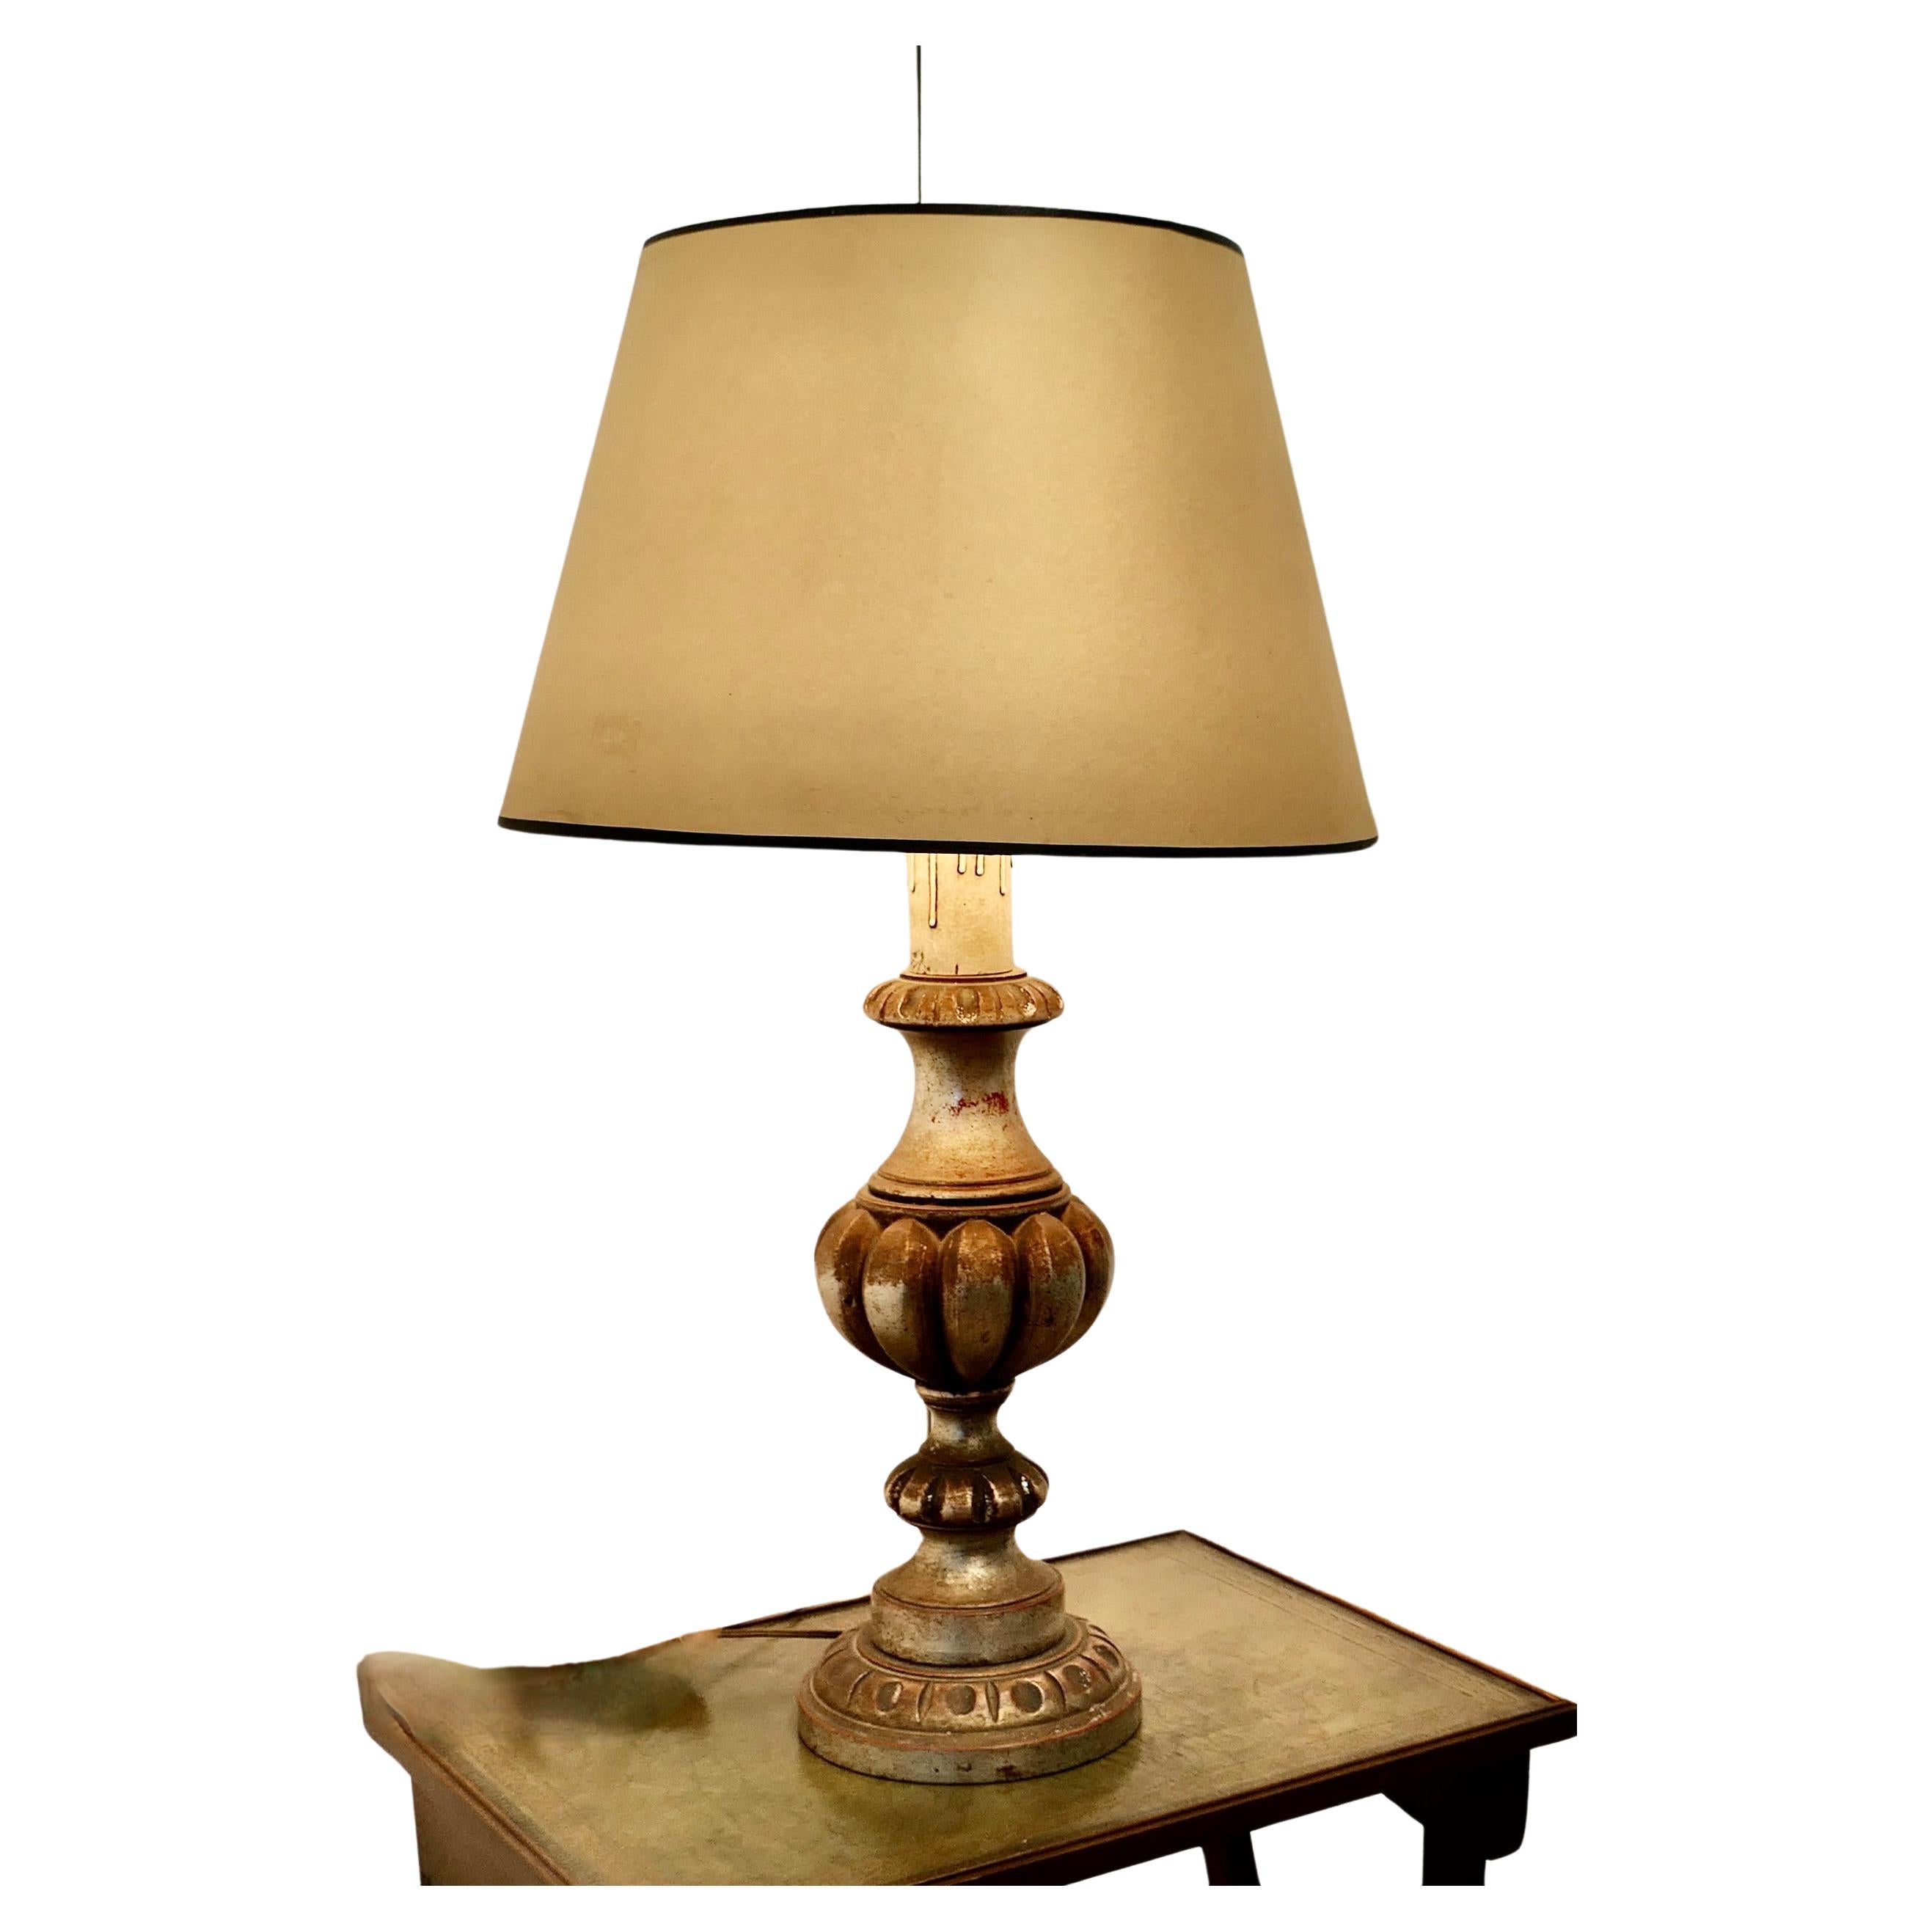 Large Carved Wooden Table Lamp  This is a great statement piece, it has a large  For Sale